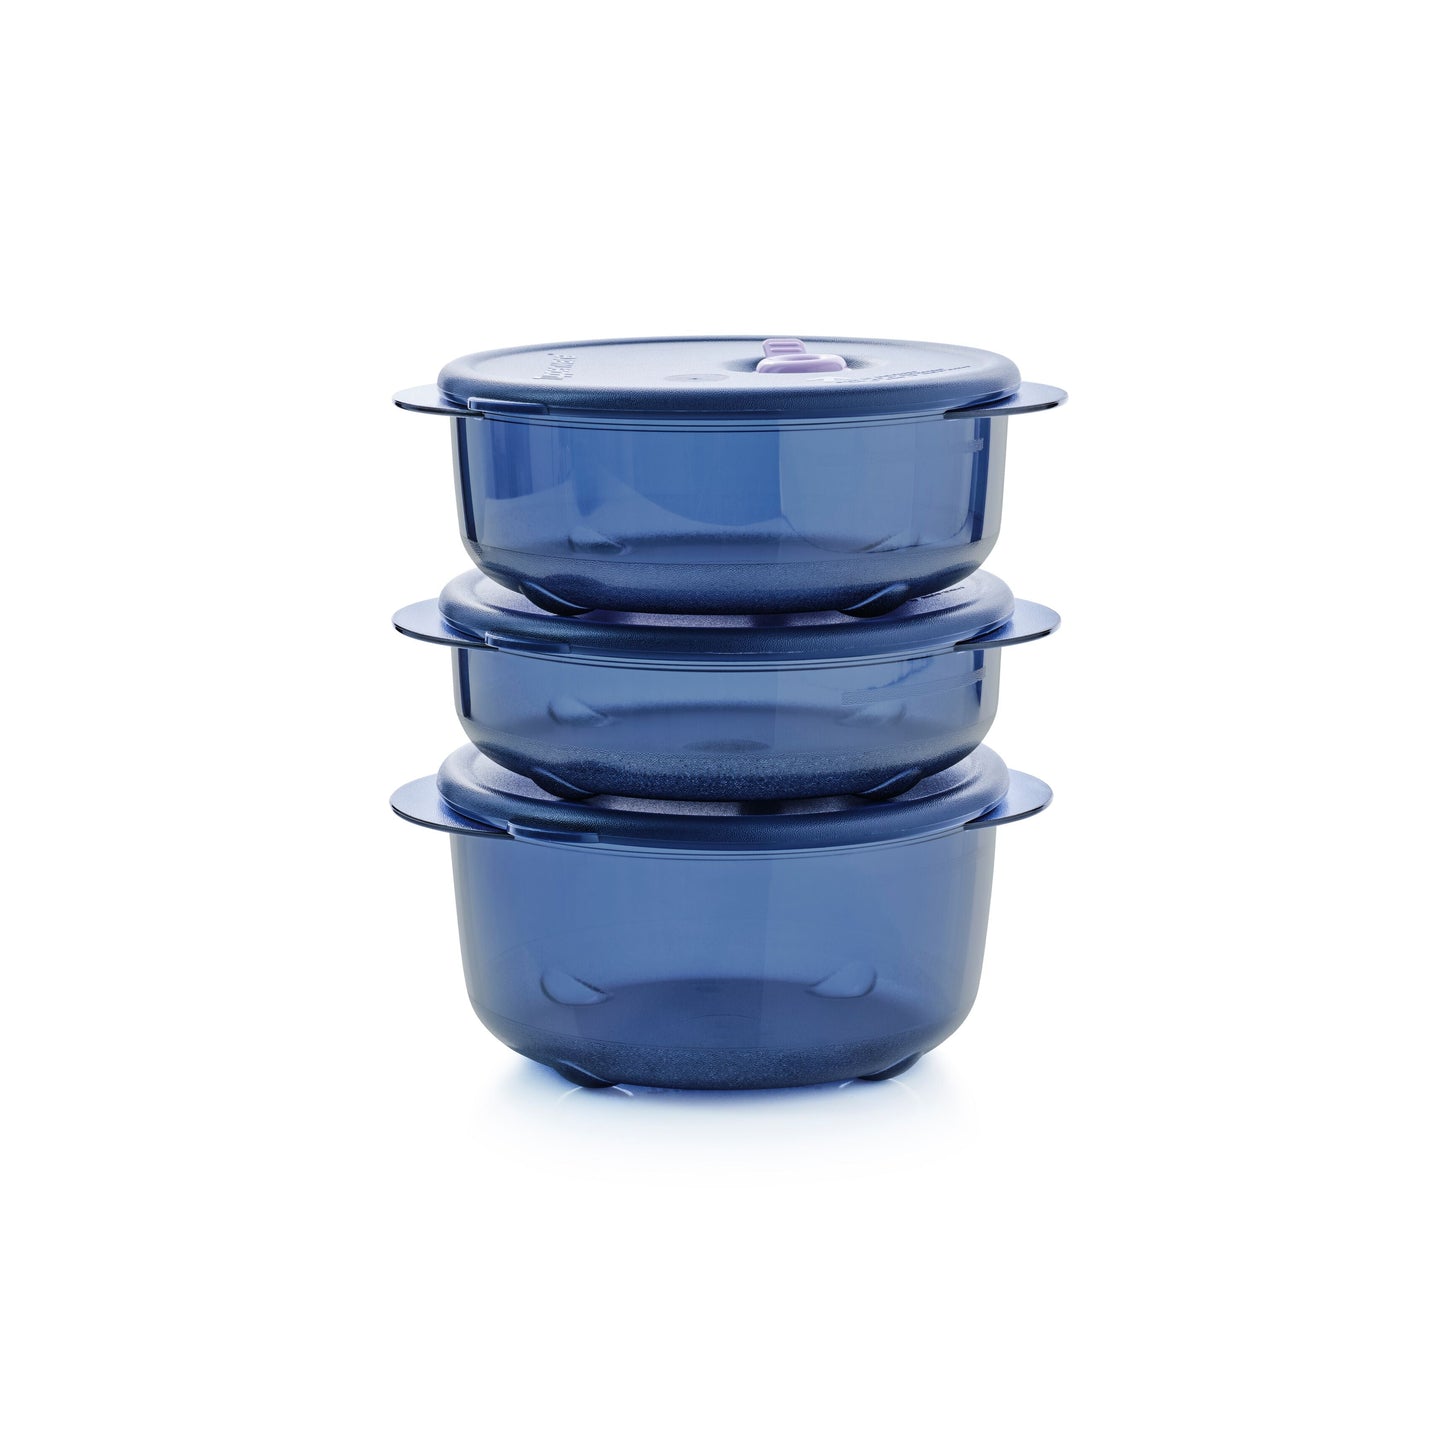 New Tupperware Heat N Serve Square 5 Cups Blue w/ White Vent Microwave Safe